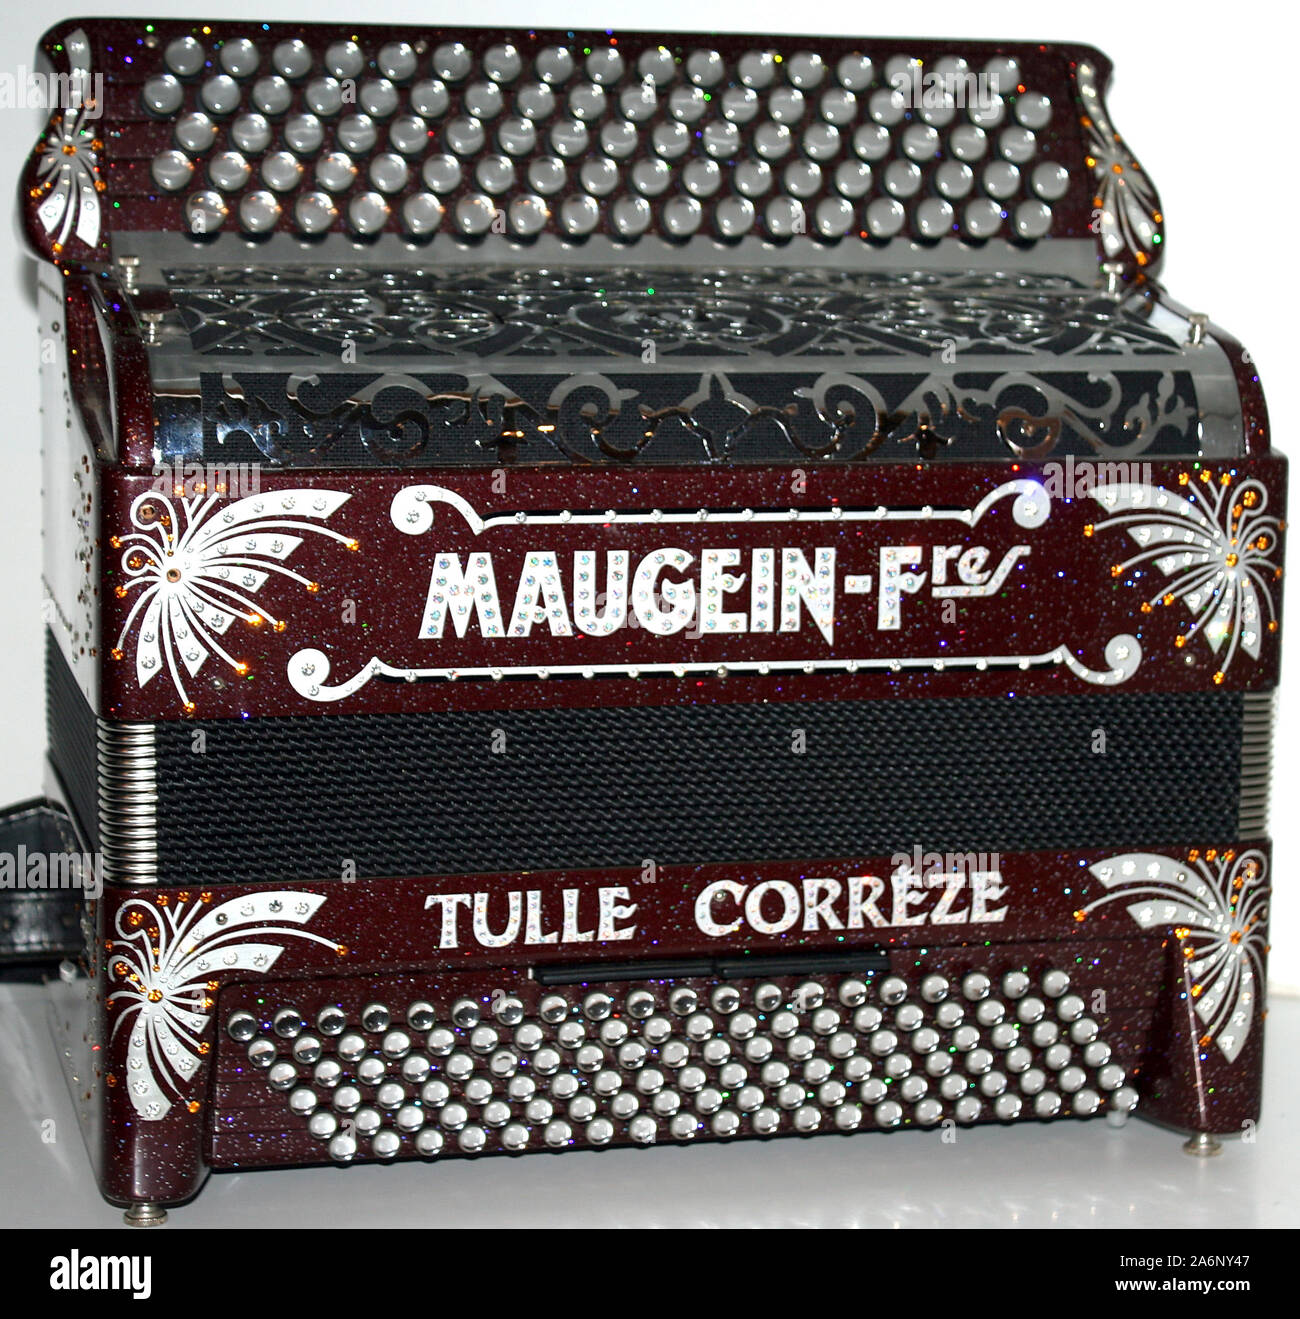 Accordion made by Maugein company in Tulle, Correze, France Stock Photo